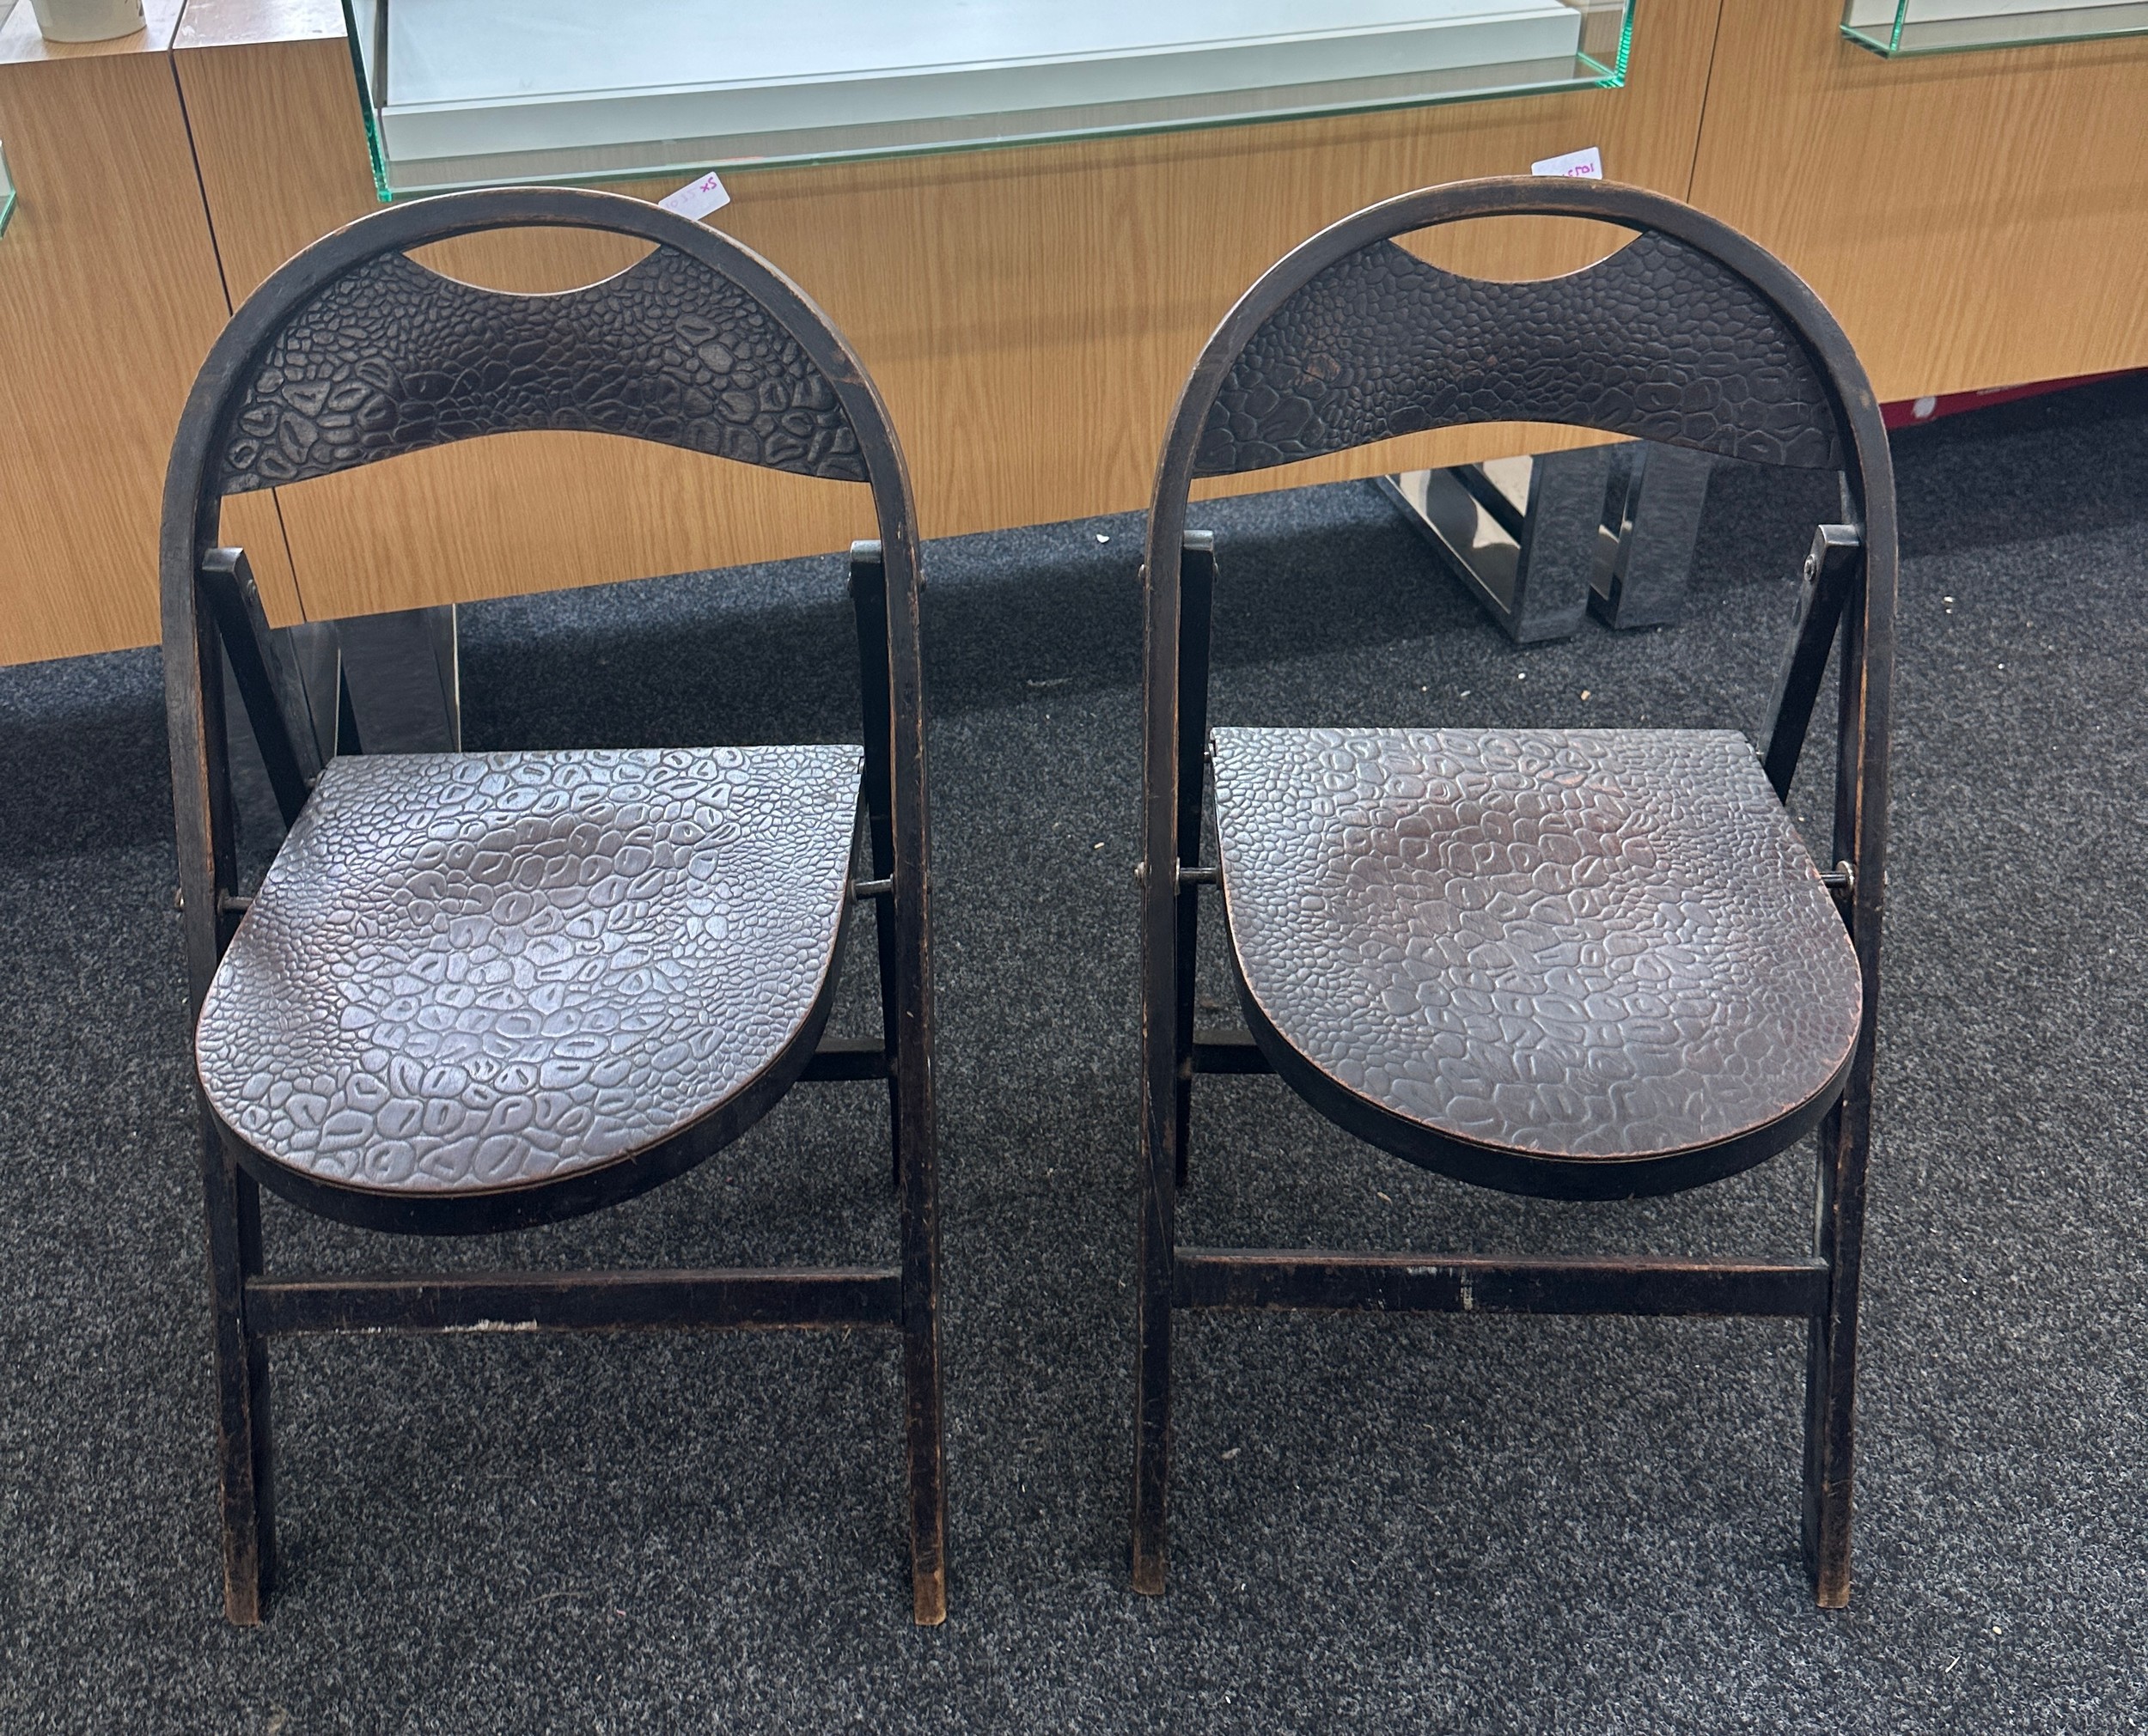 2 Folding textured chairs - Image 3 of 4